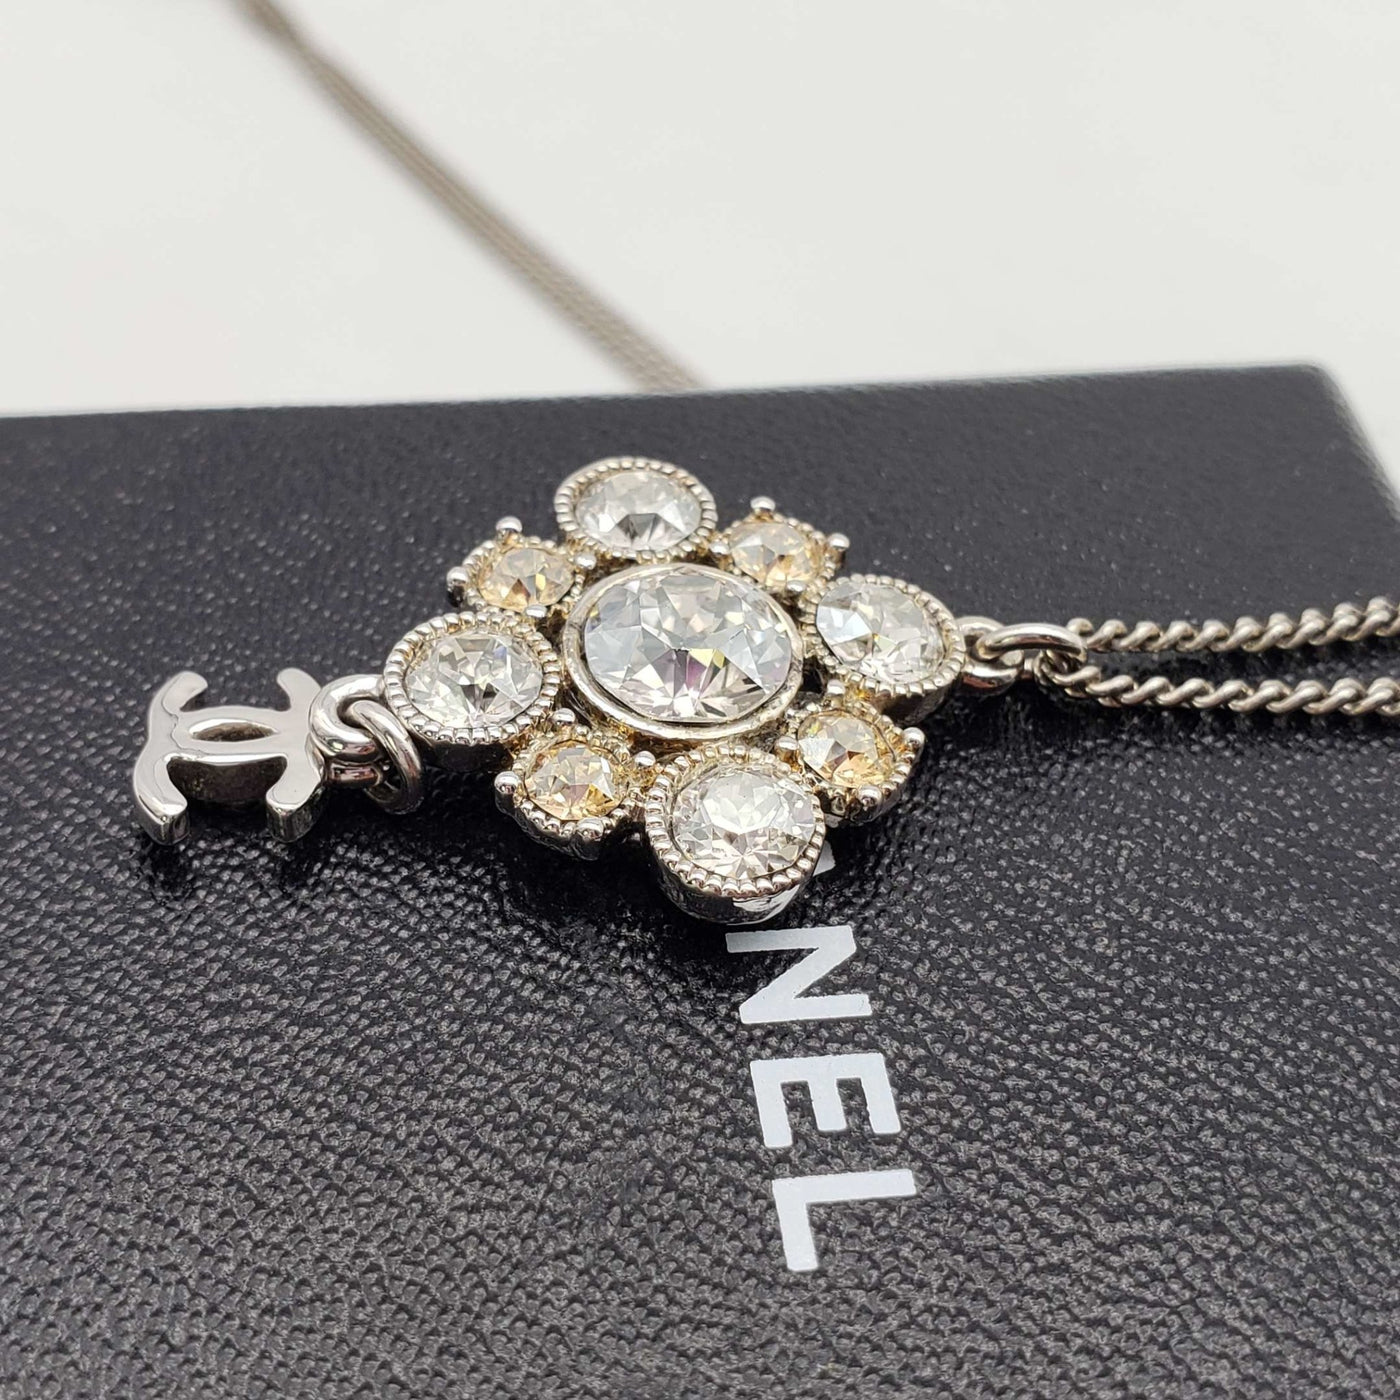 CHANEL CC with stone Necklace Silver Color - Luxury Cheaper